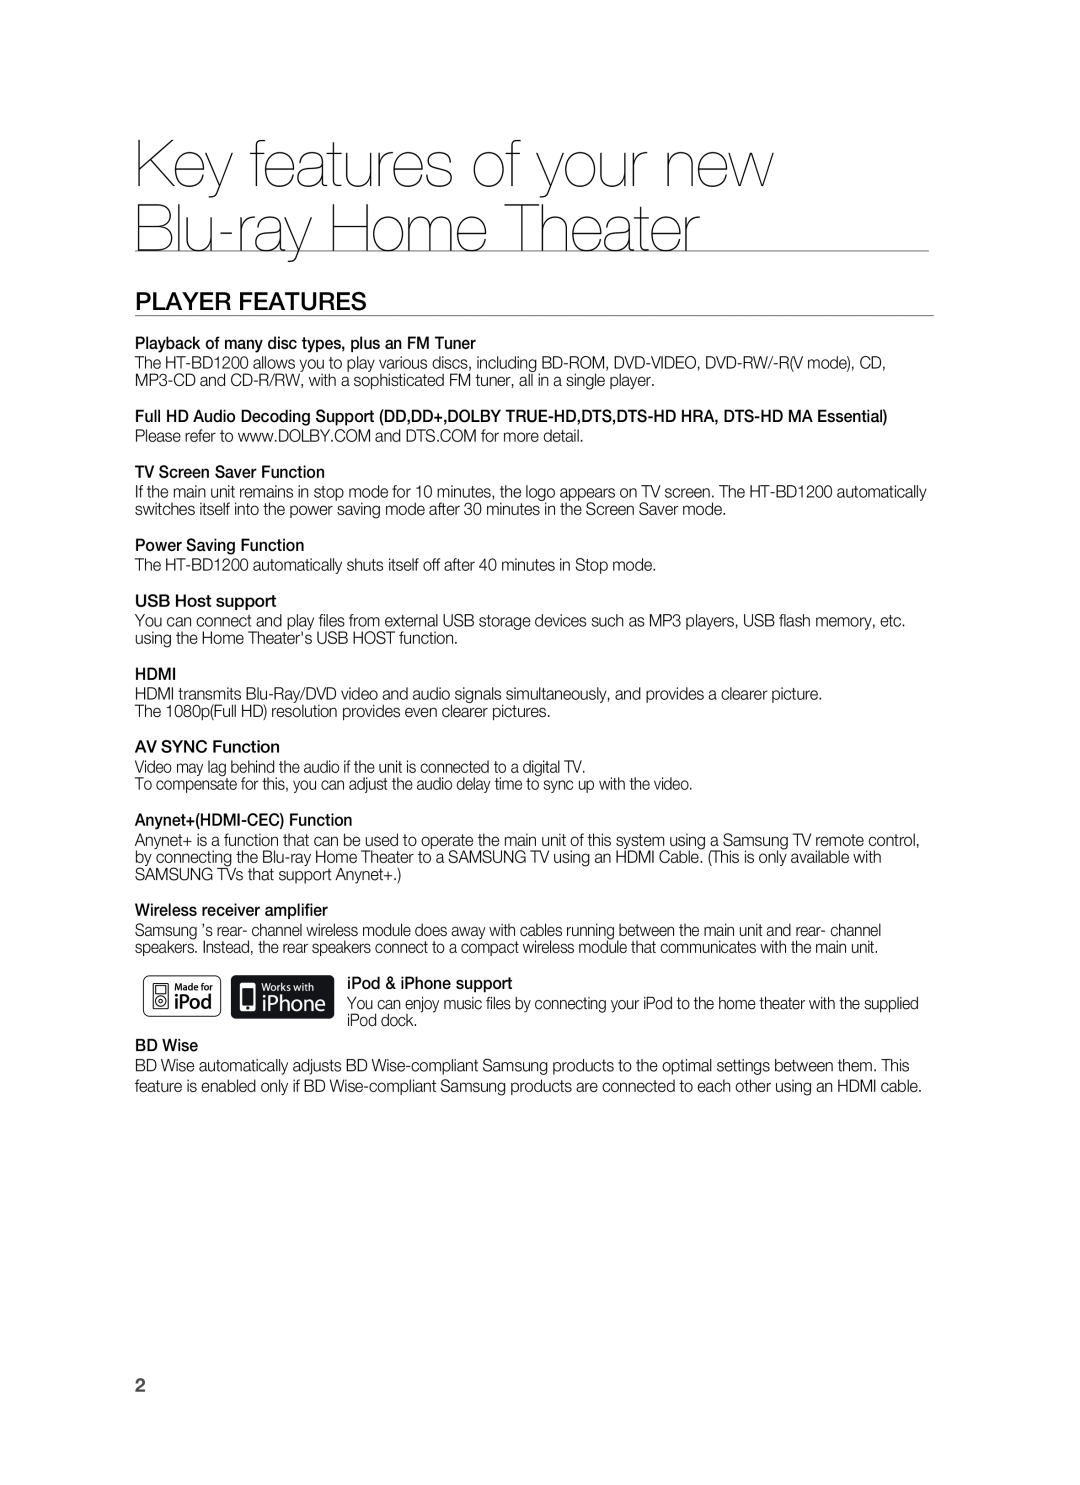 Samsung AH68-02178Z, HT-BD1200 user manual Key features of your new Blu-ray Home Theater, Player Features 